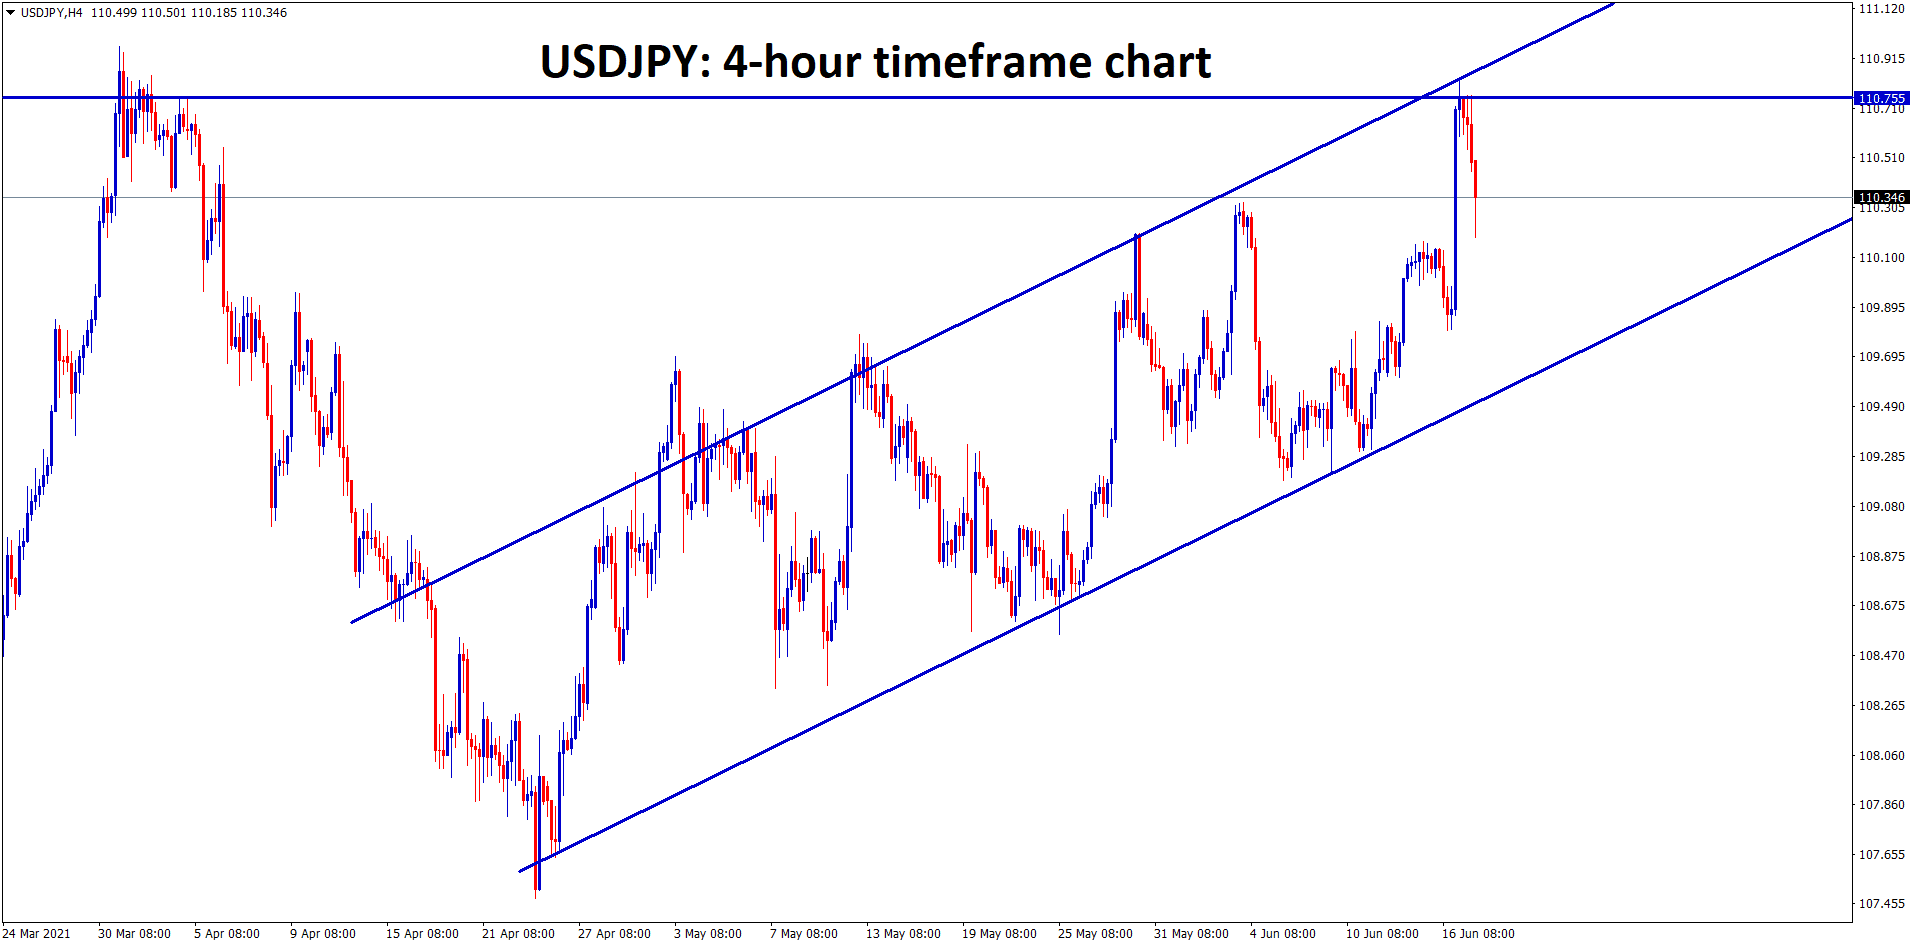 USDJPY making a correction from the major resistance zone. but still moving in an Uptrend Ascending channel